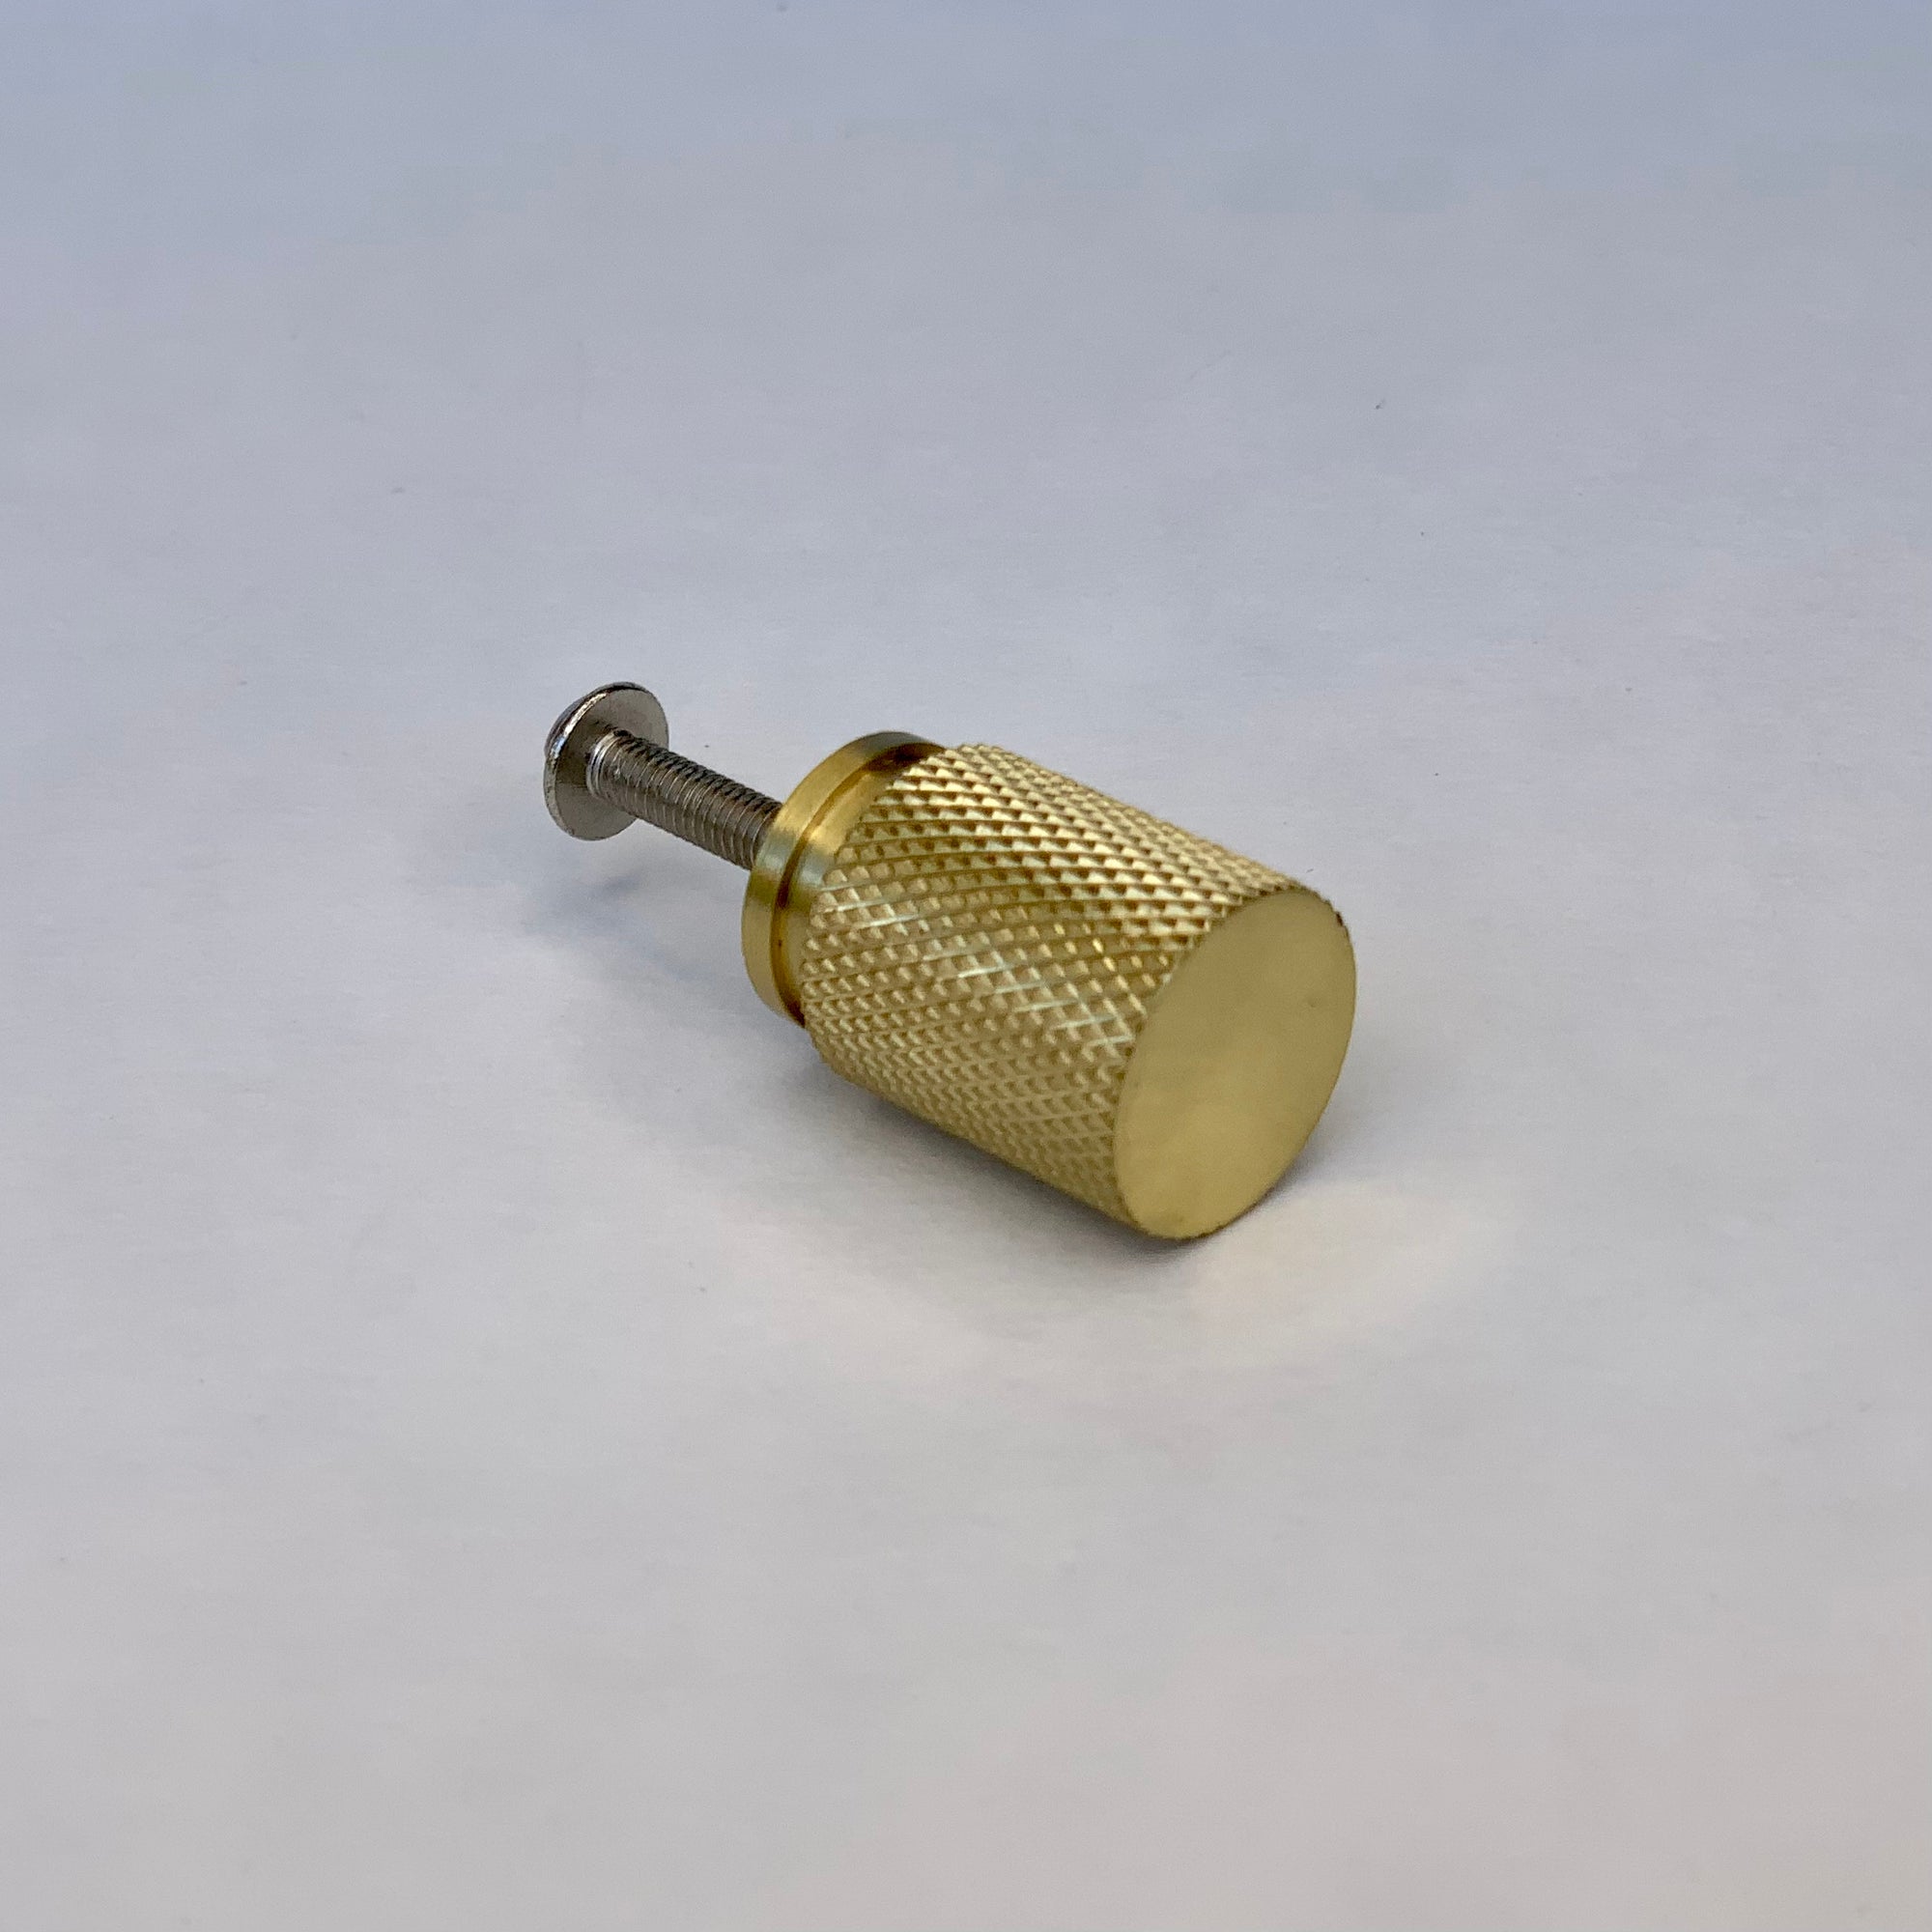 Knurled Gold Brass Pull